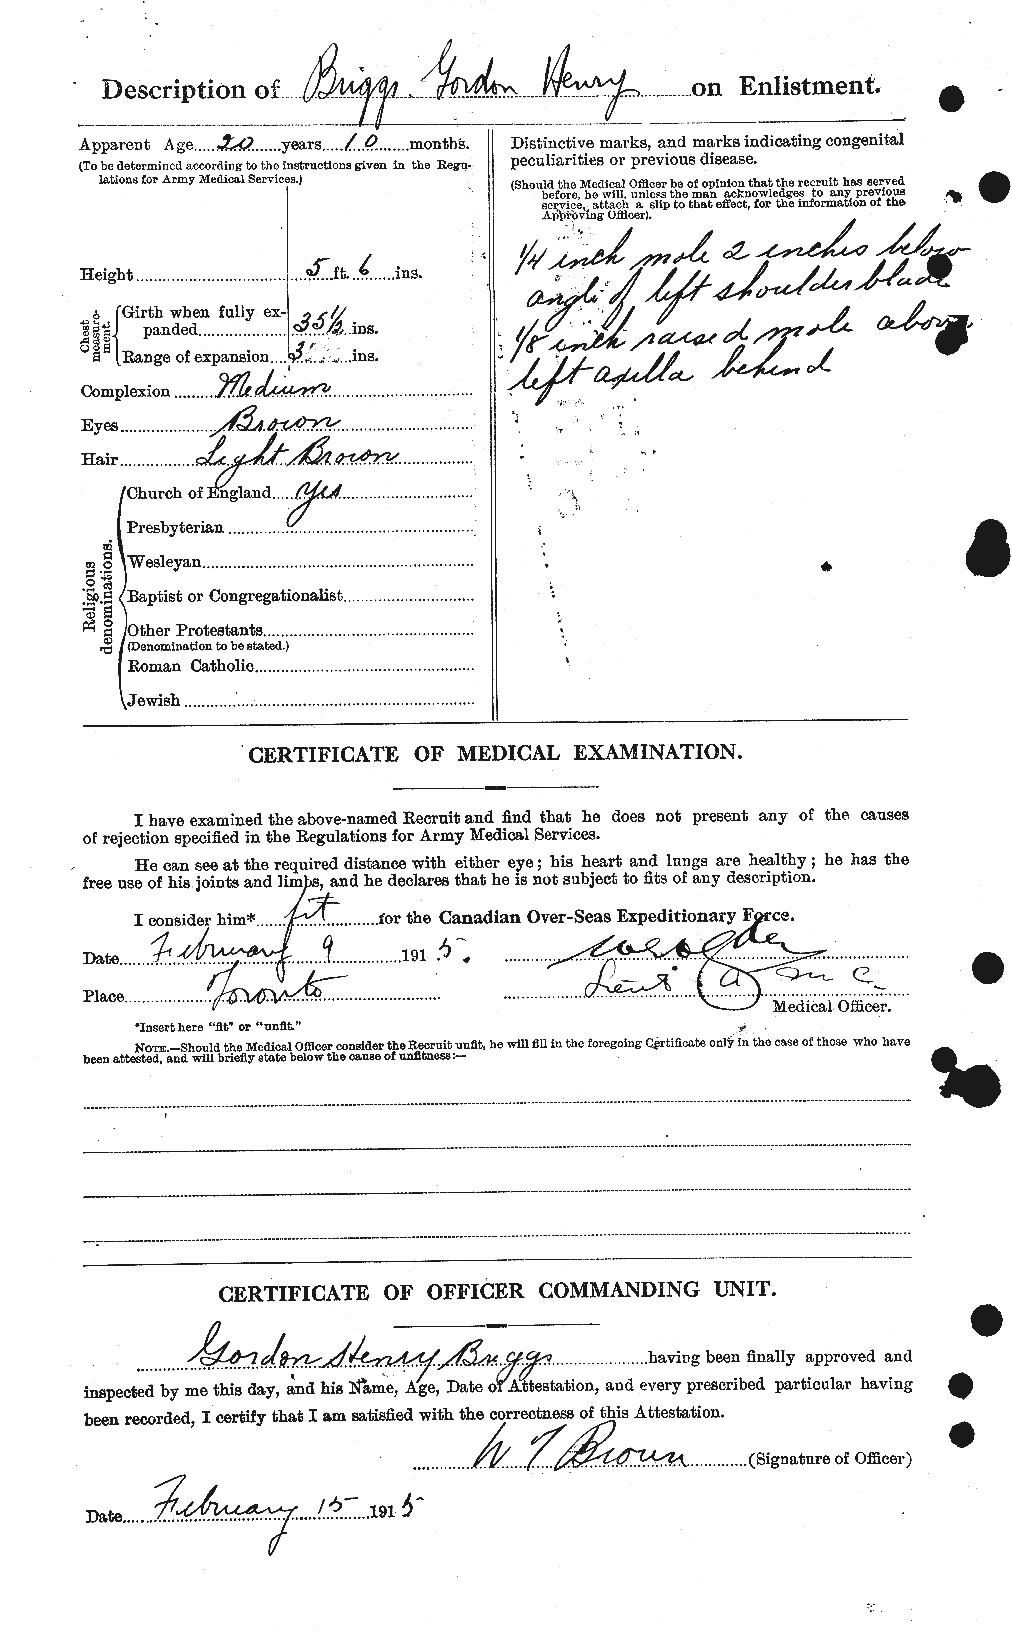 Personnel Records of the First World War - CEF 264022b